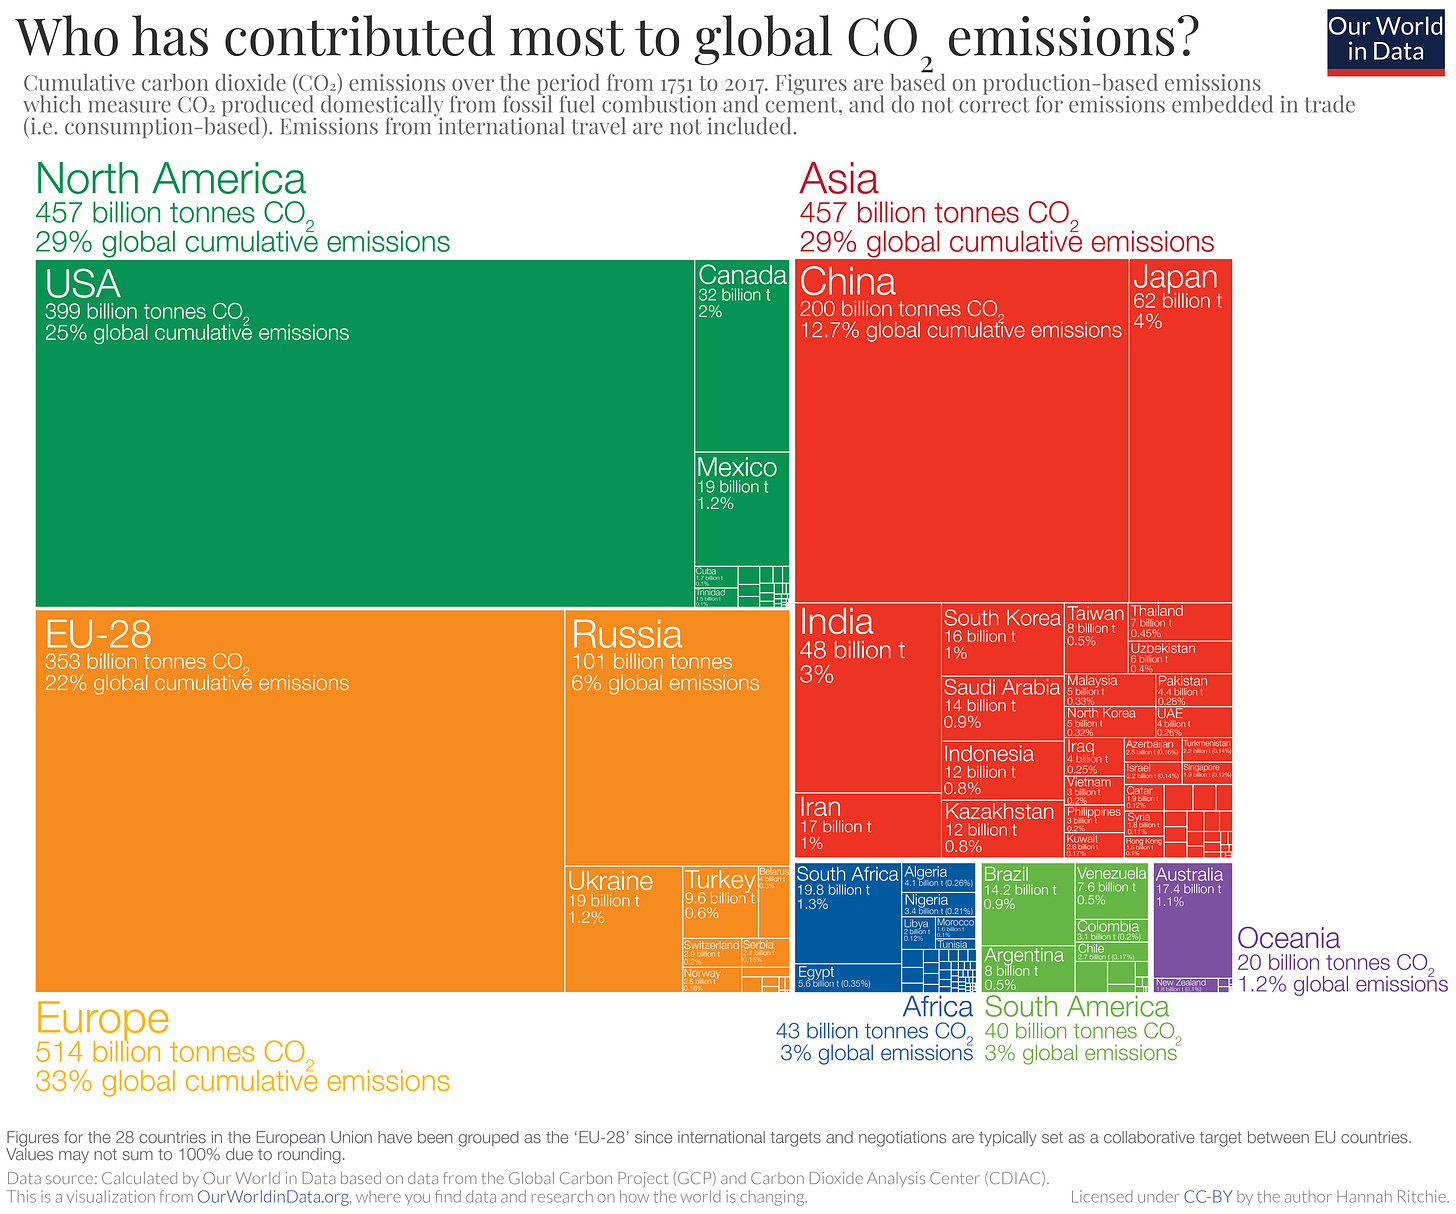 A graph on 'who has contributed most to global CO2 emissions? Showing that the EU is responsible for 22% of global cumulative emissions since 1751, only behind the USA.